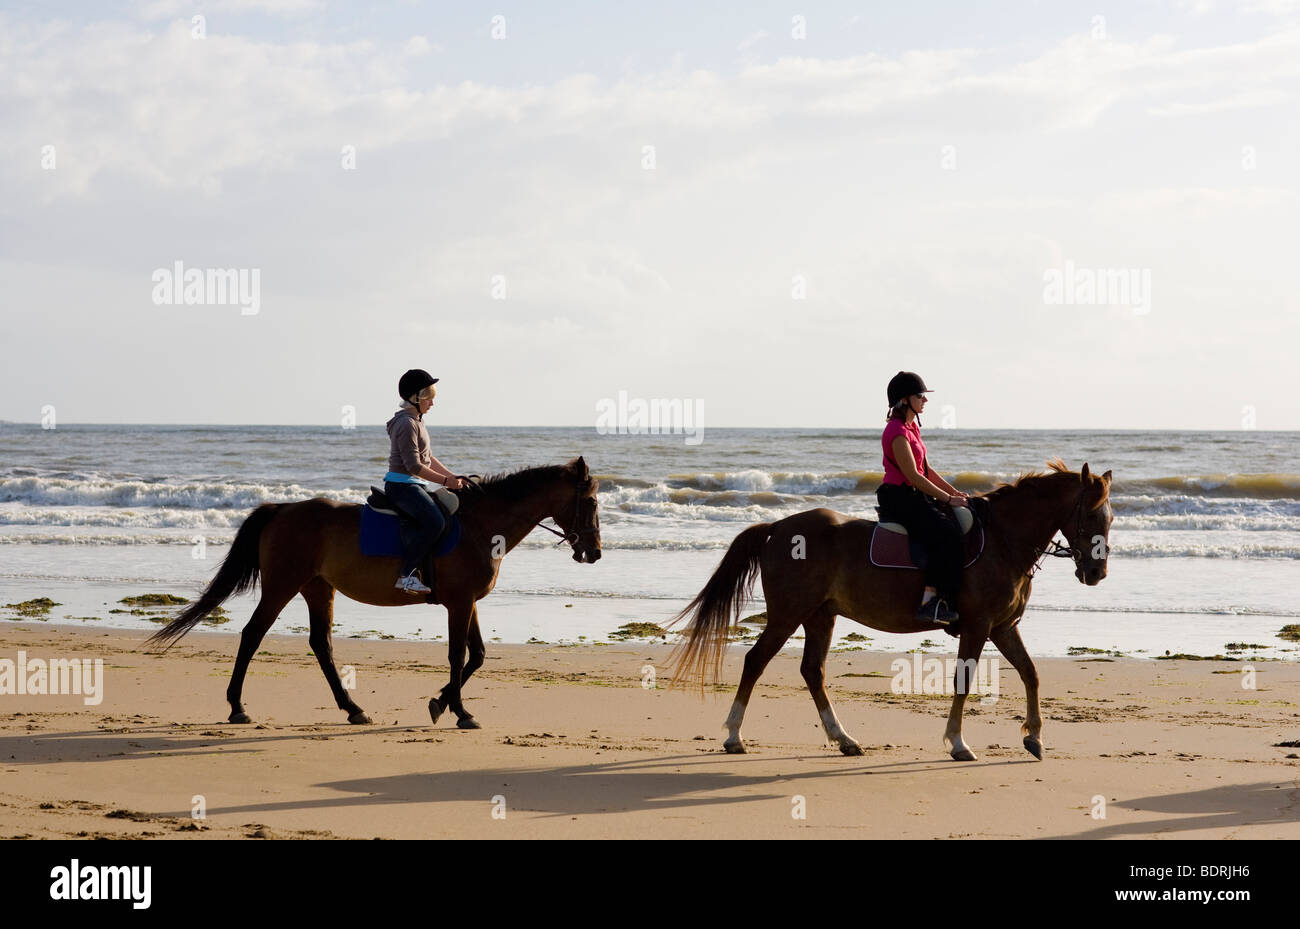 A horse riding school goes for a hack on the beach and in the surf. Riders are of all different ages and abilities. Stock Photo